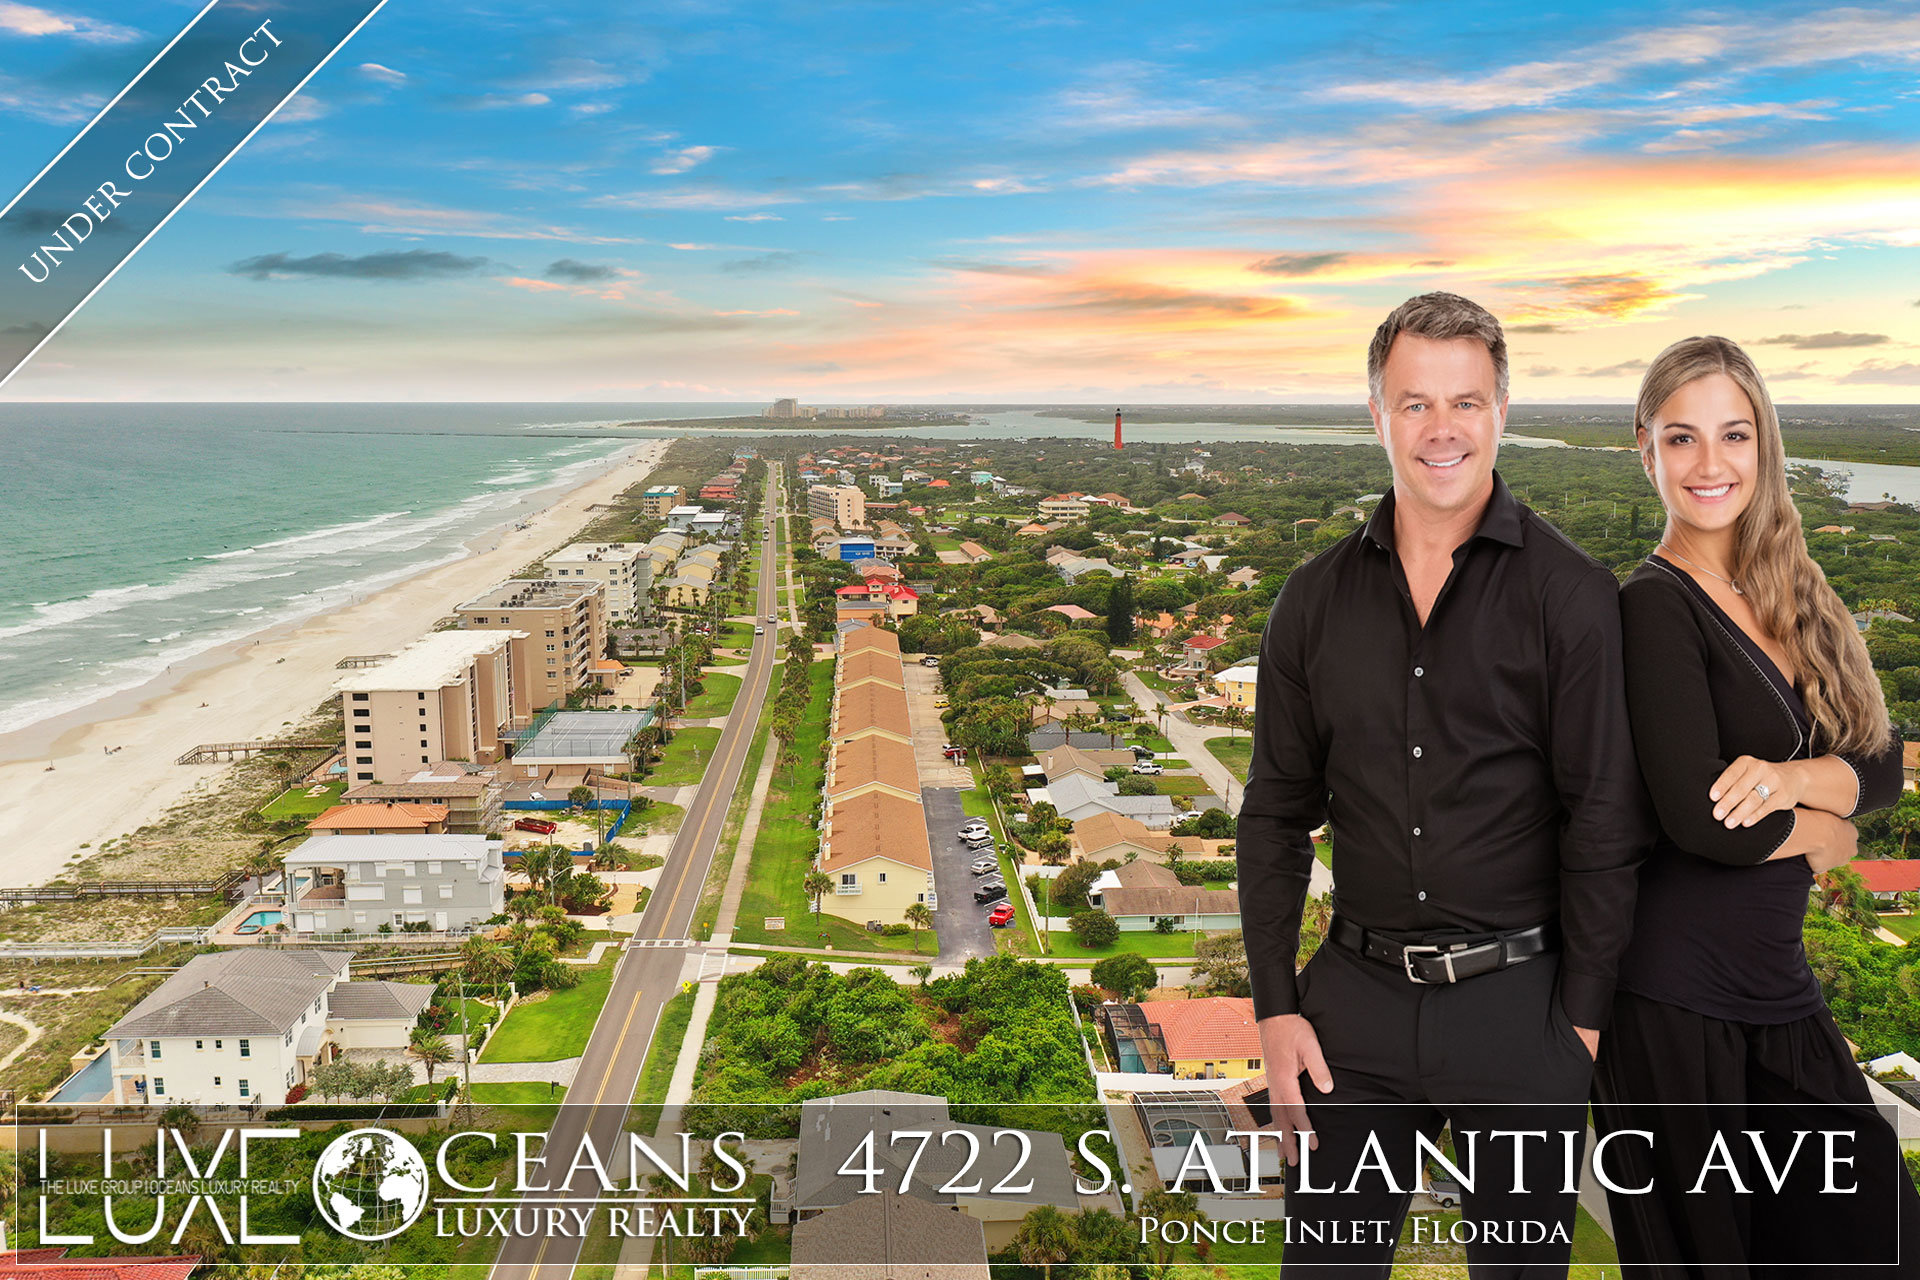 Ponce Inlet Real Estate For Sale. 4722 S Atlantic Ave Beachside ocean view land Under Contract 